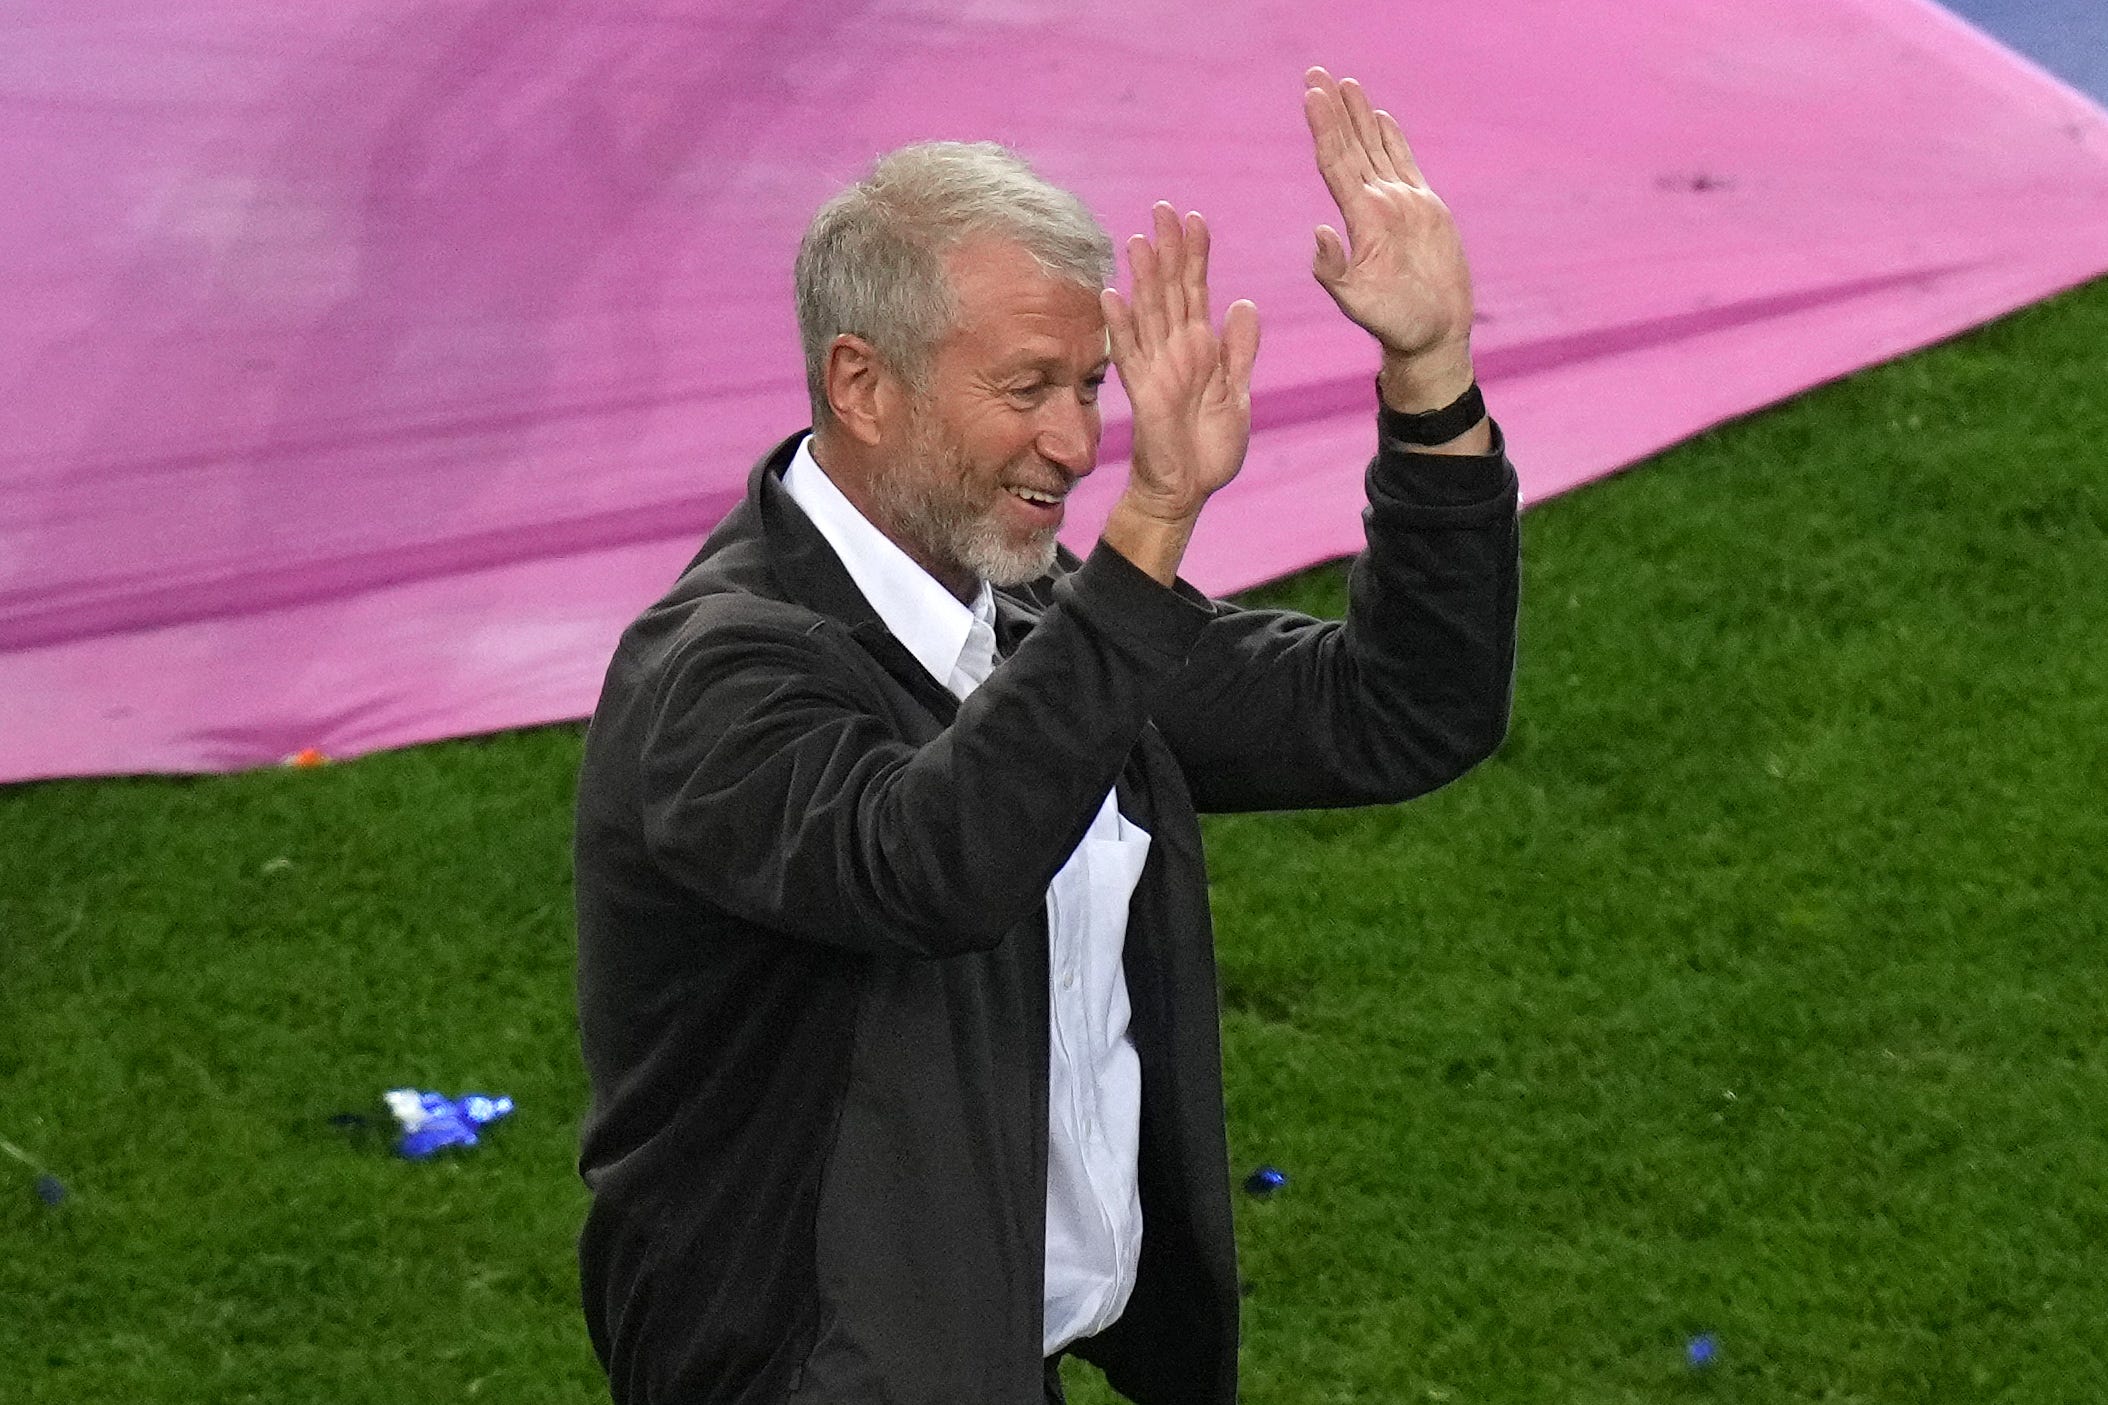 Roman Abramovich: Chelsea's owner is seeking a 'peaceful resolution' to the Ukraine invasion, according to a spokesman